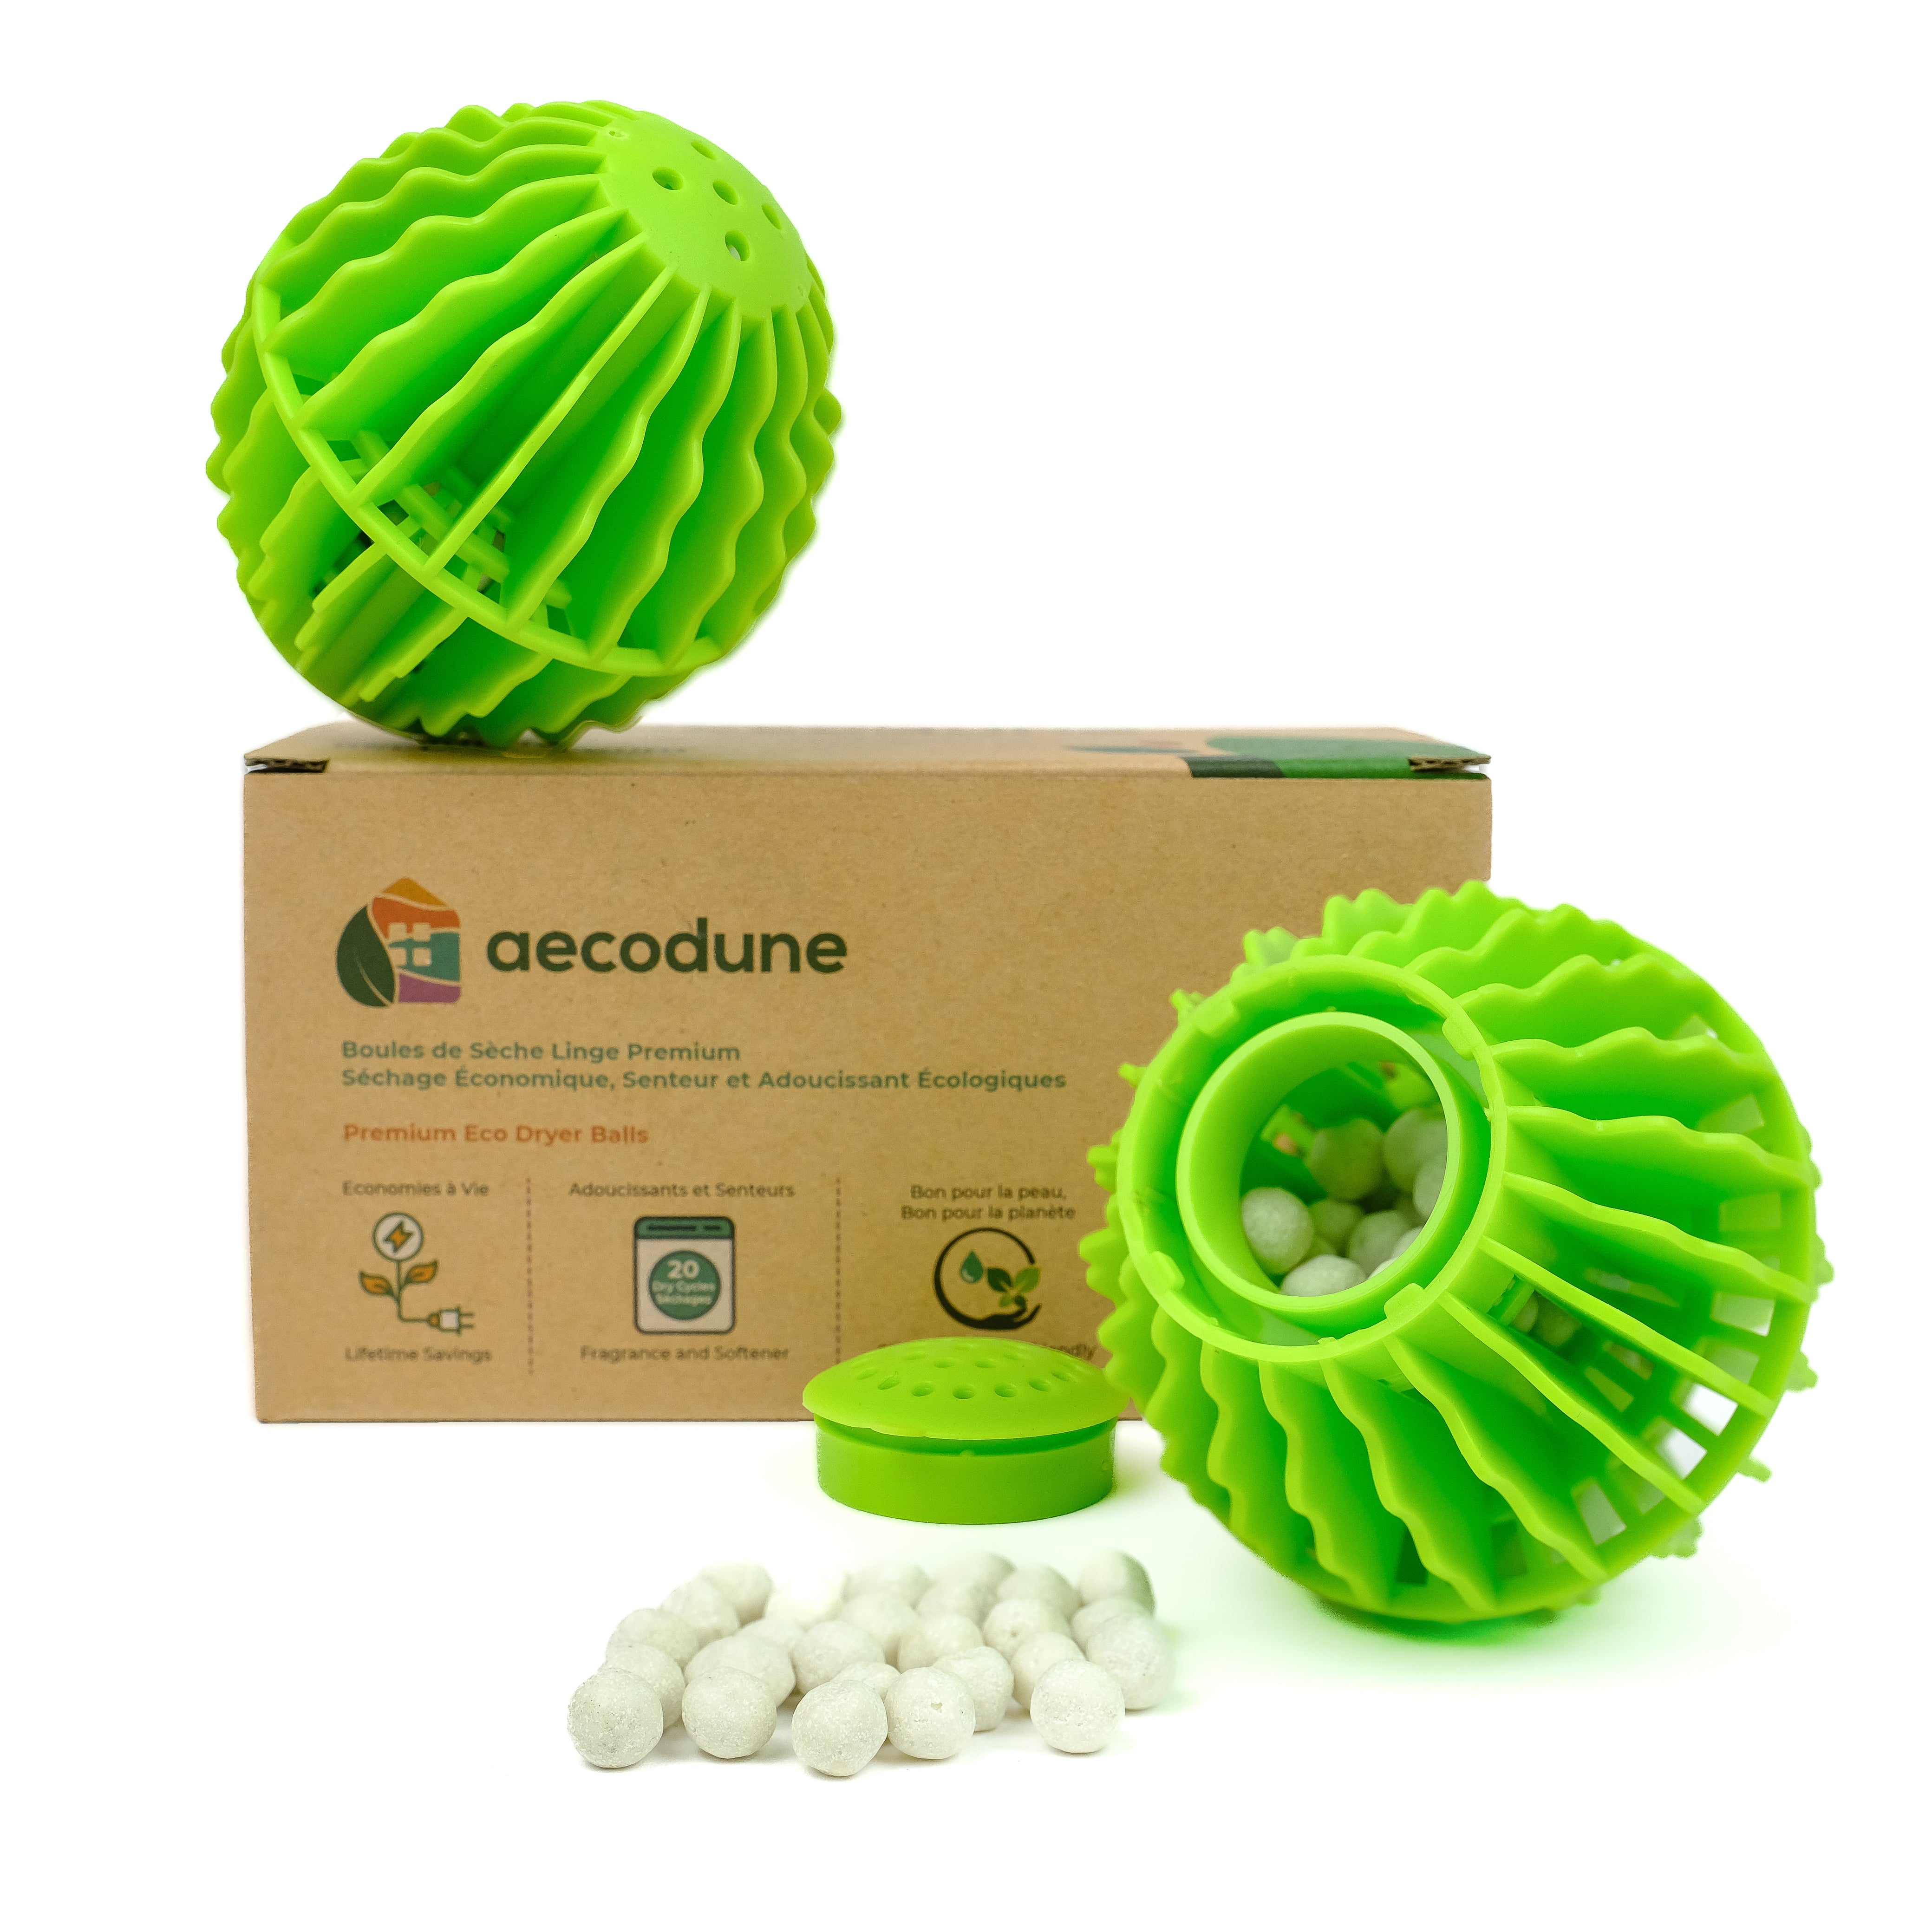 aecodune Innovative, Economical and Ecological Dryer Balls for Soft and Scented Laundry